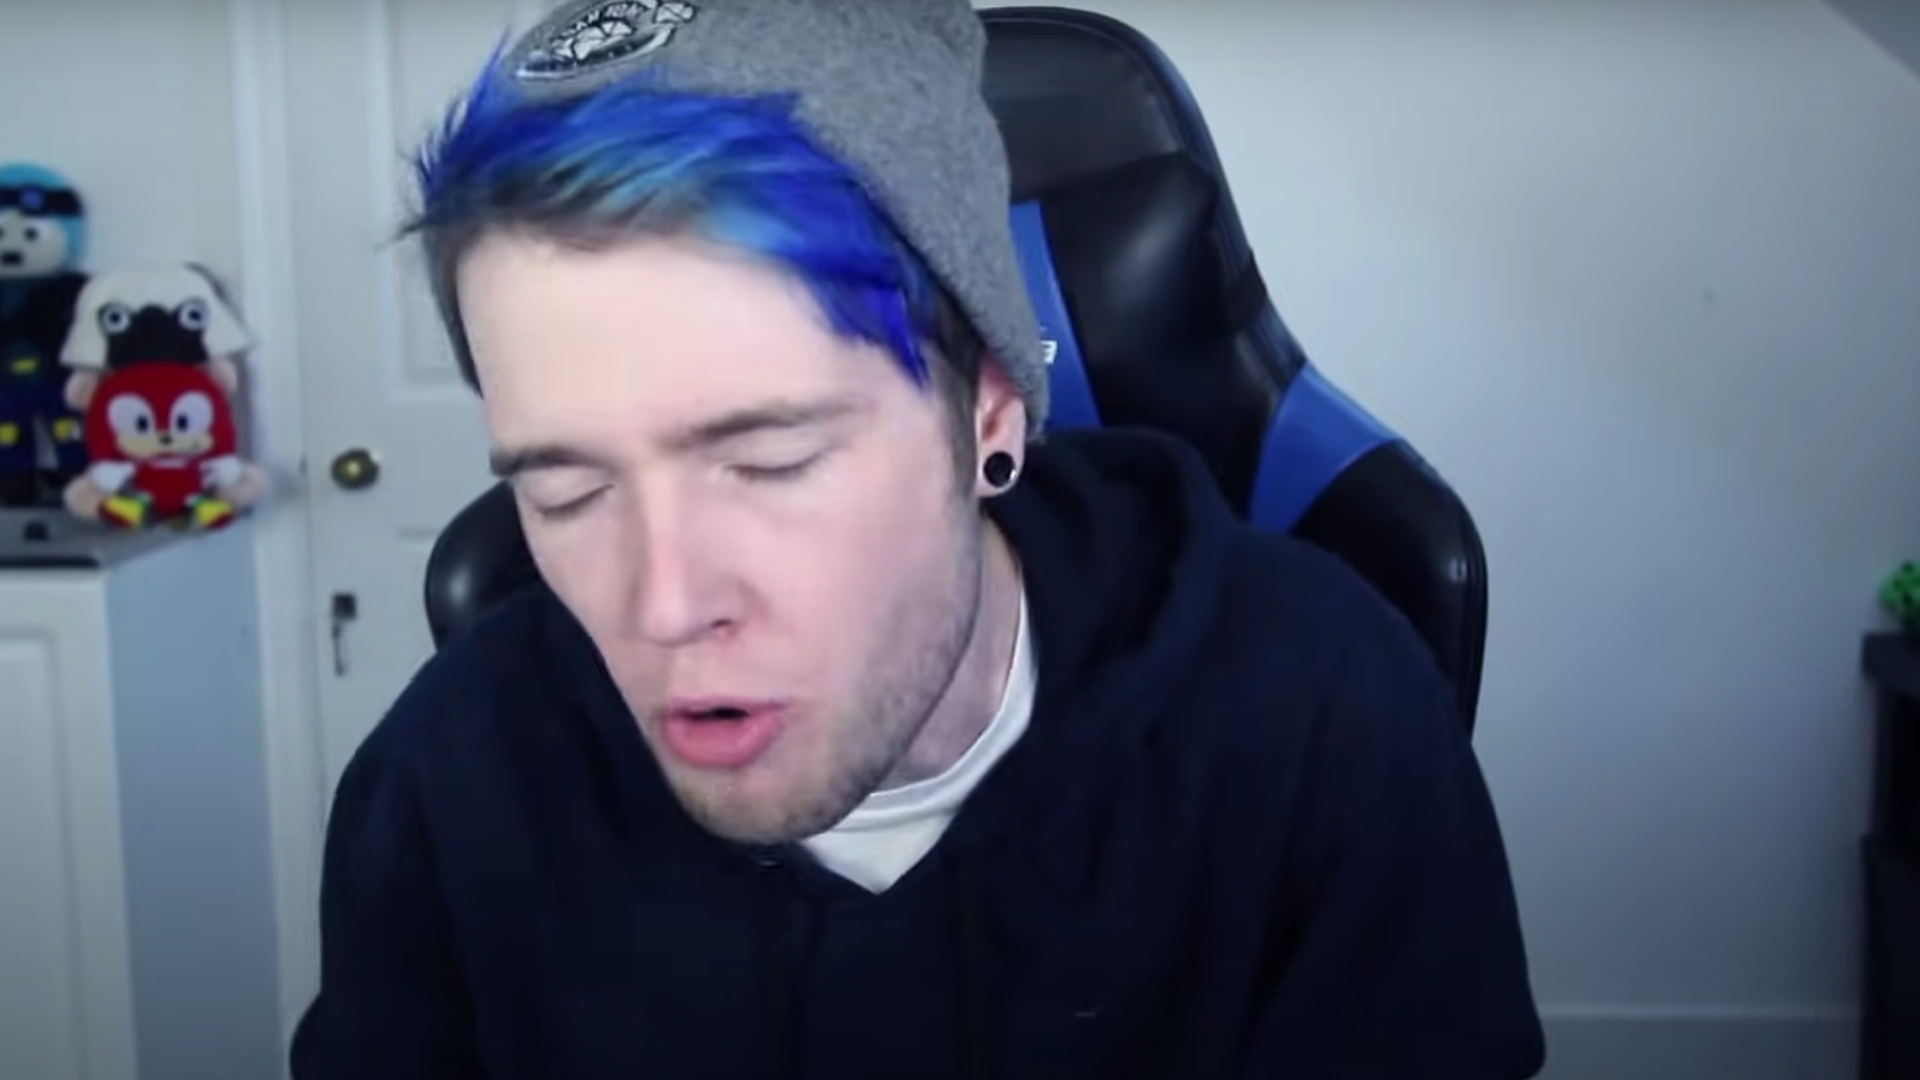 Dantdm's New Hair: Pink and Blue! - wide 7